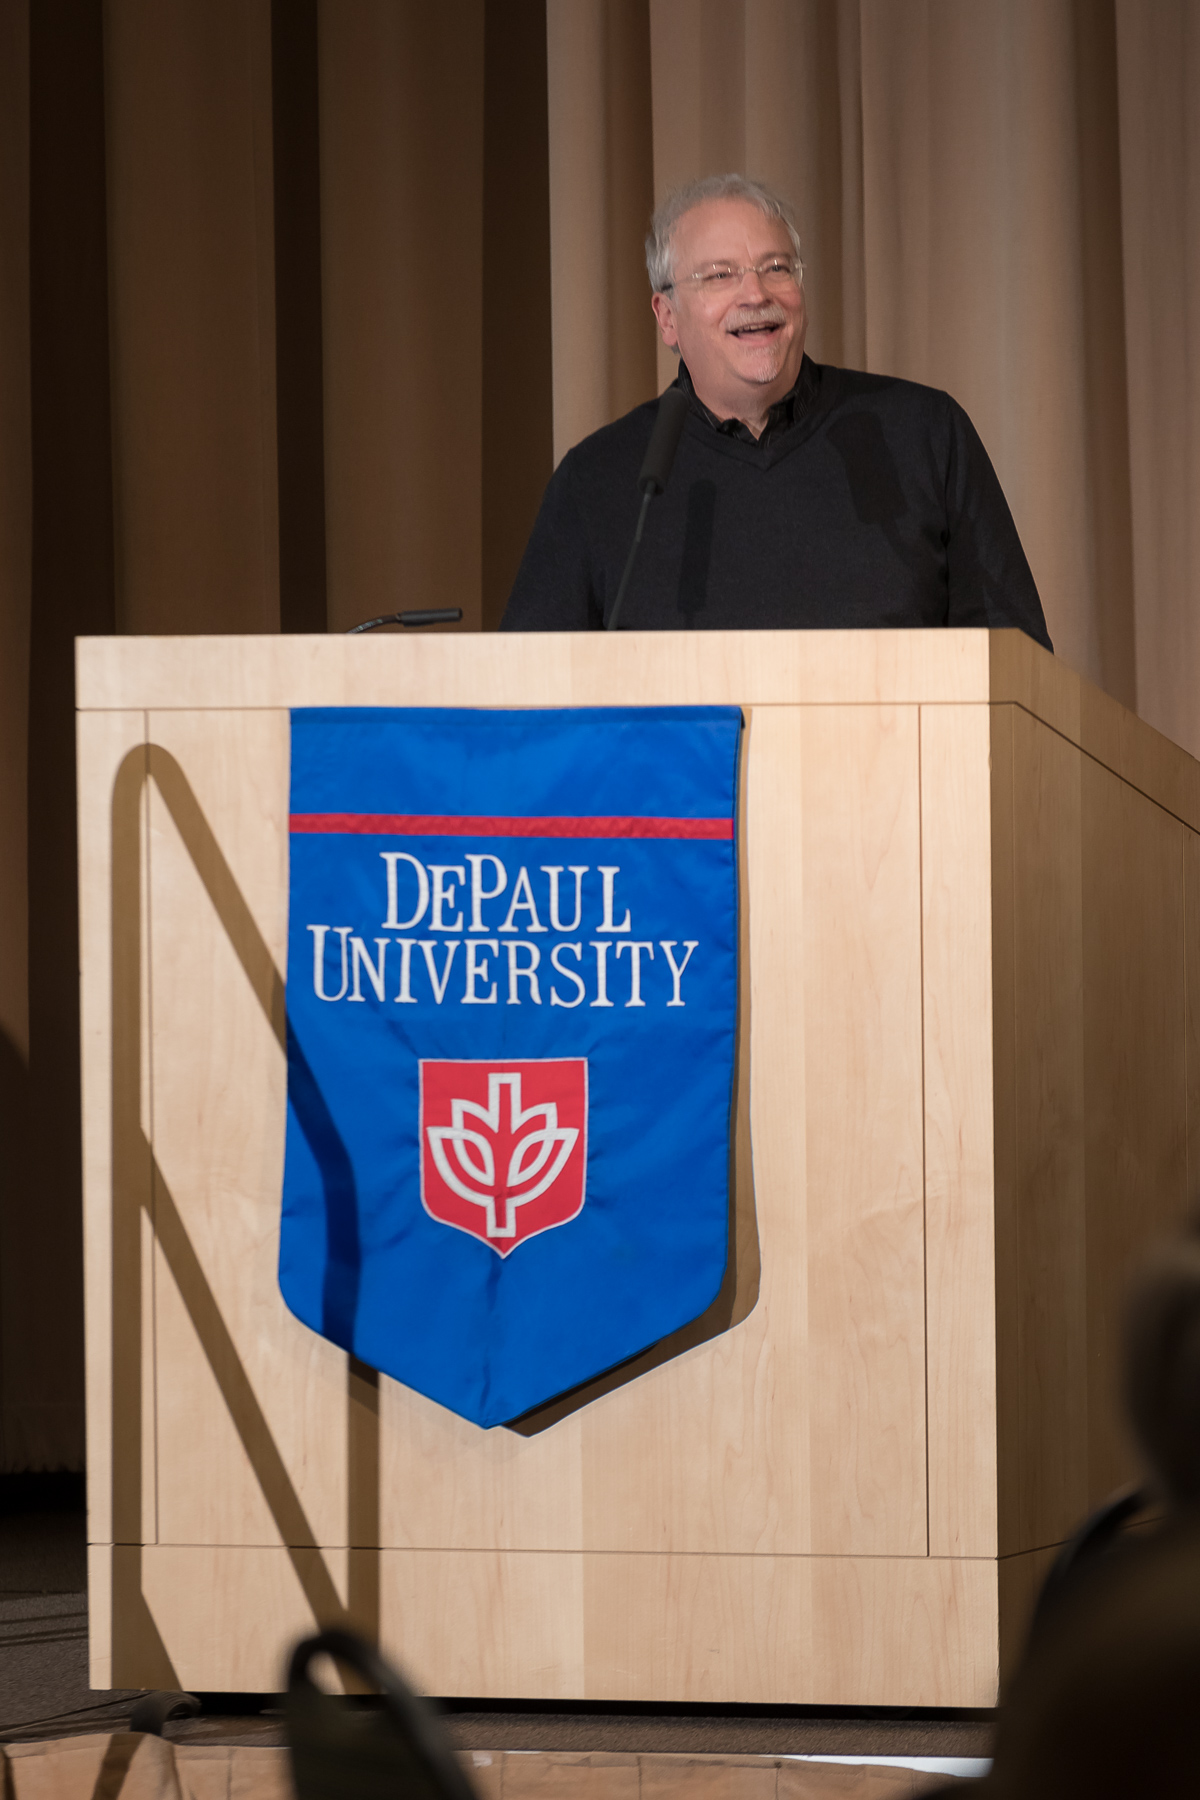 Peter Vandenberg, department chair in Writing, Rhetoric and Discourse, offers his reflections on the past 25 years as DePaul University faculty and staff members are honored for their 25 years of service during a luncheon, Tuesday, Nov. 13, 2018, at the Lincoln Park Student Center. The honorees will have their names added to plaques located on the Loop and Lincoln Park Campuses. (DePaul University/Jeff Carrion)